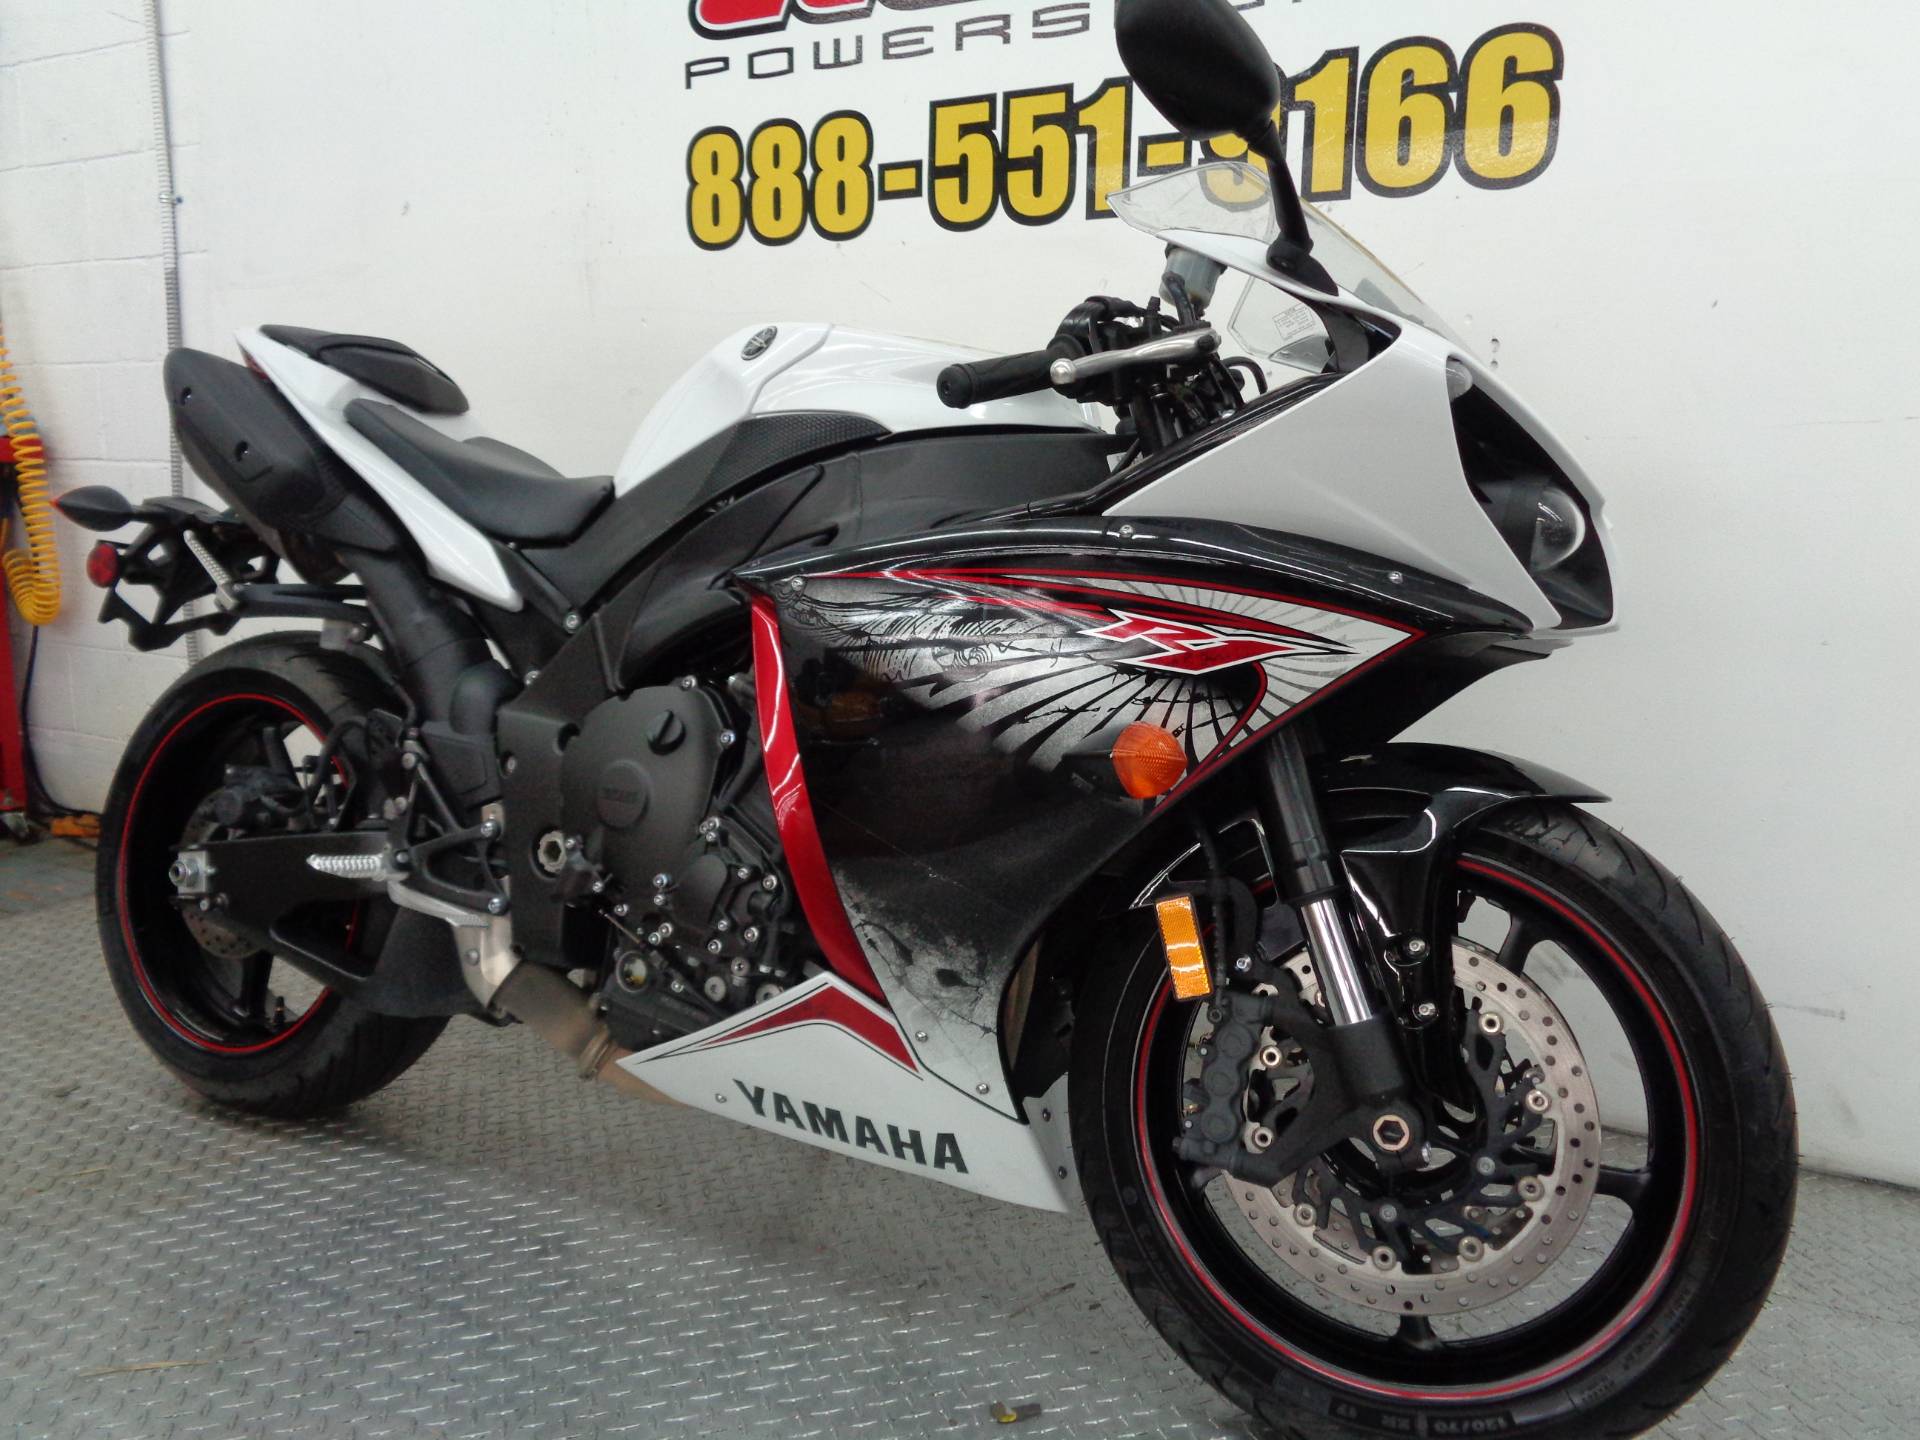 Used 2012 Yamaha YZF R1 Motorcycles In Tulsa OK Stock Number 013987